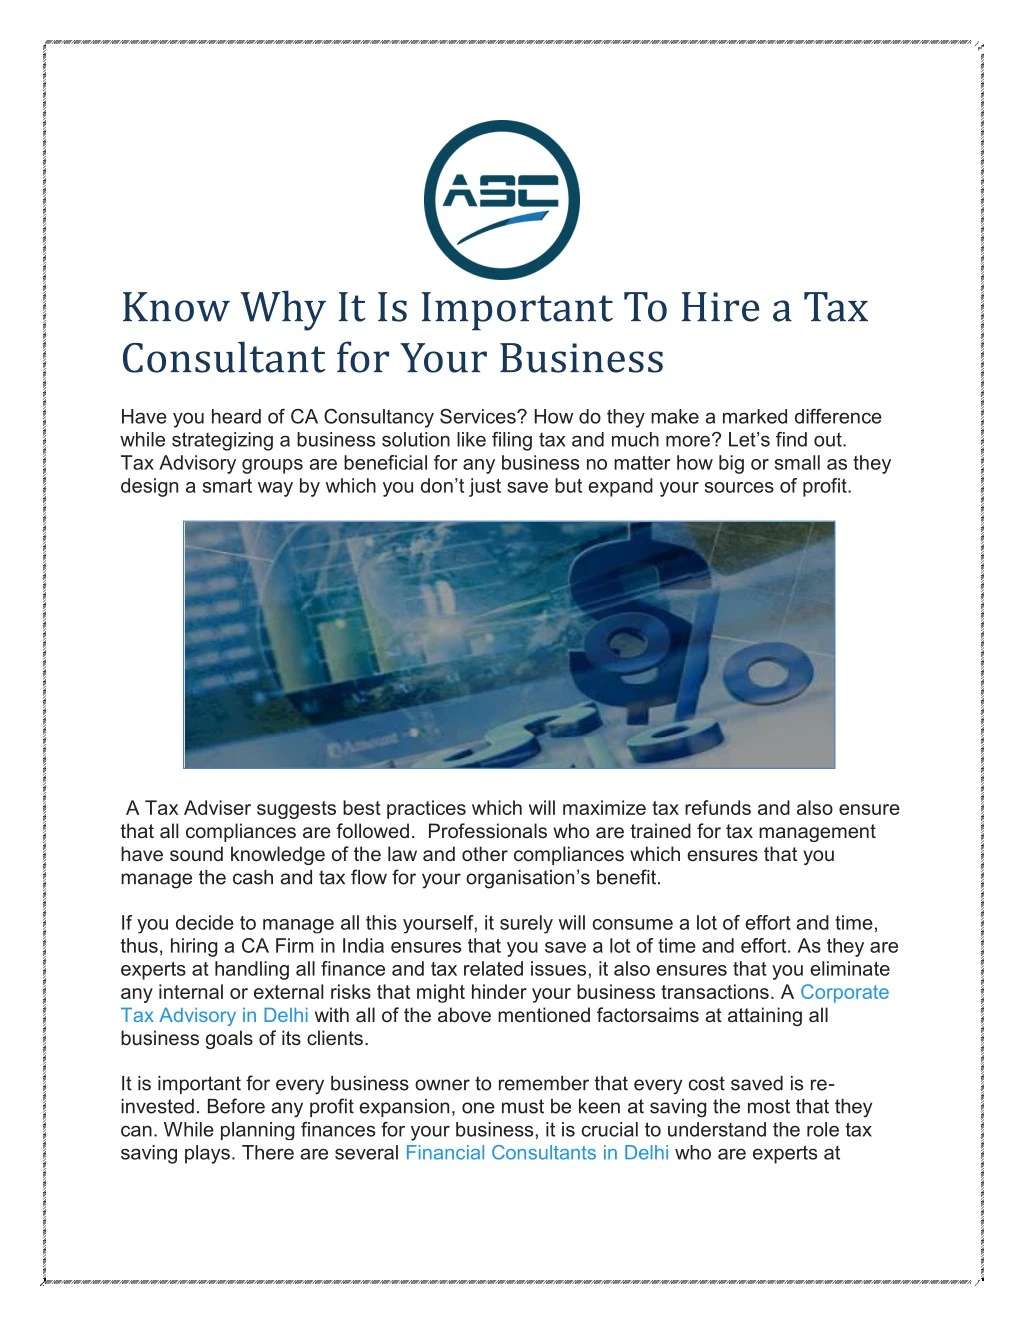 know why it is important to hire a tax consultant